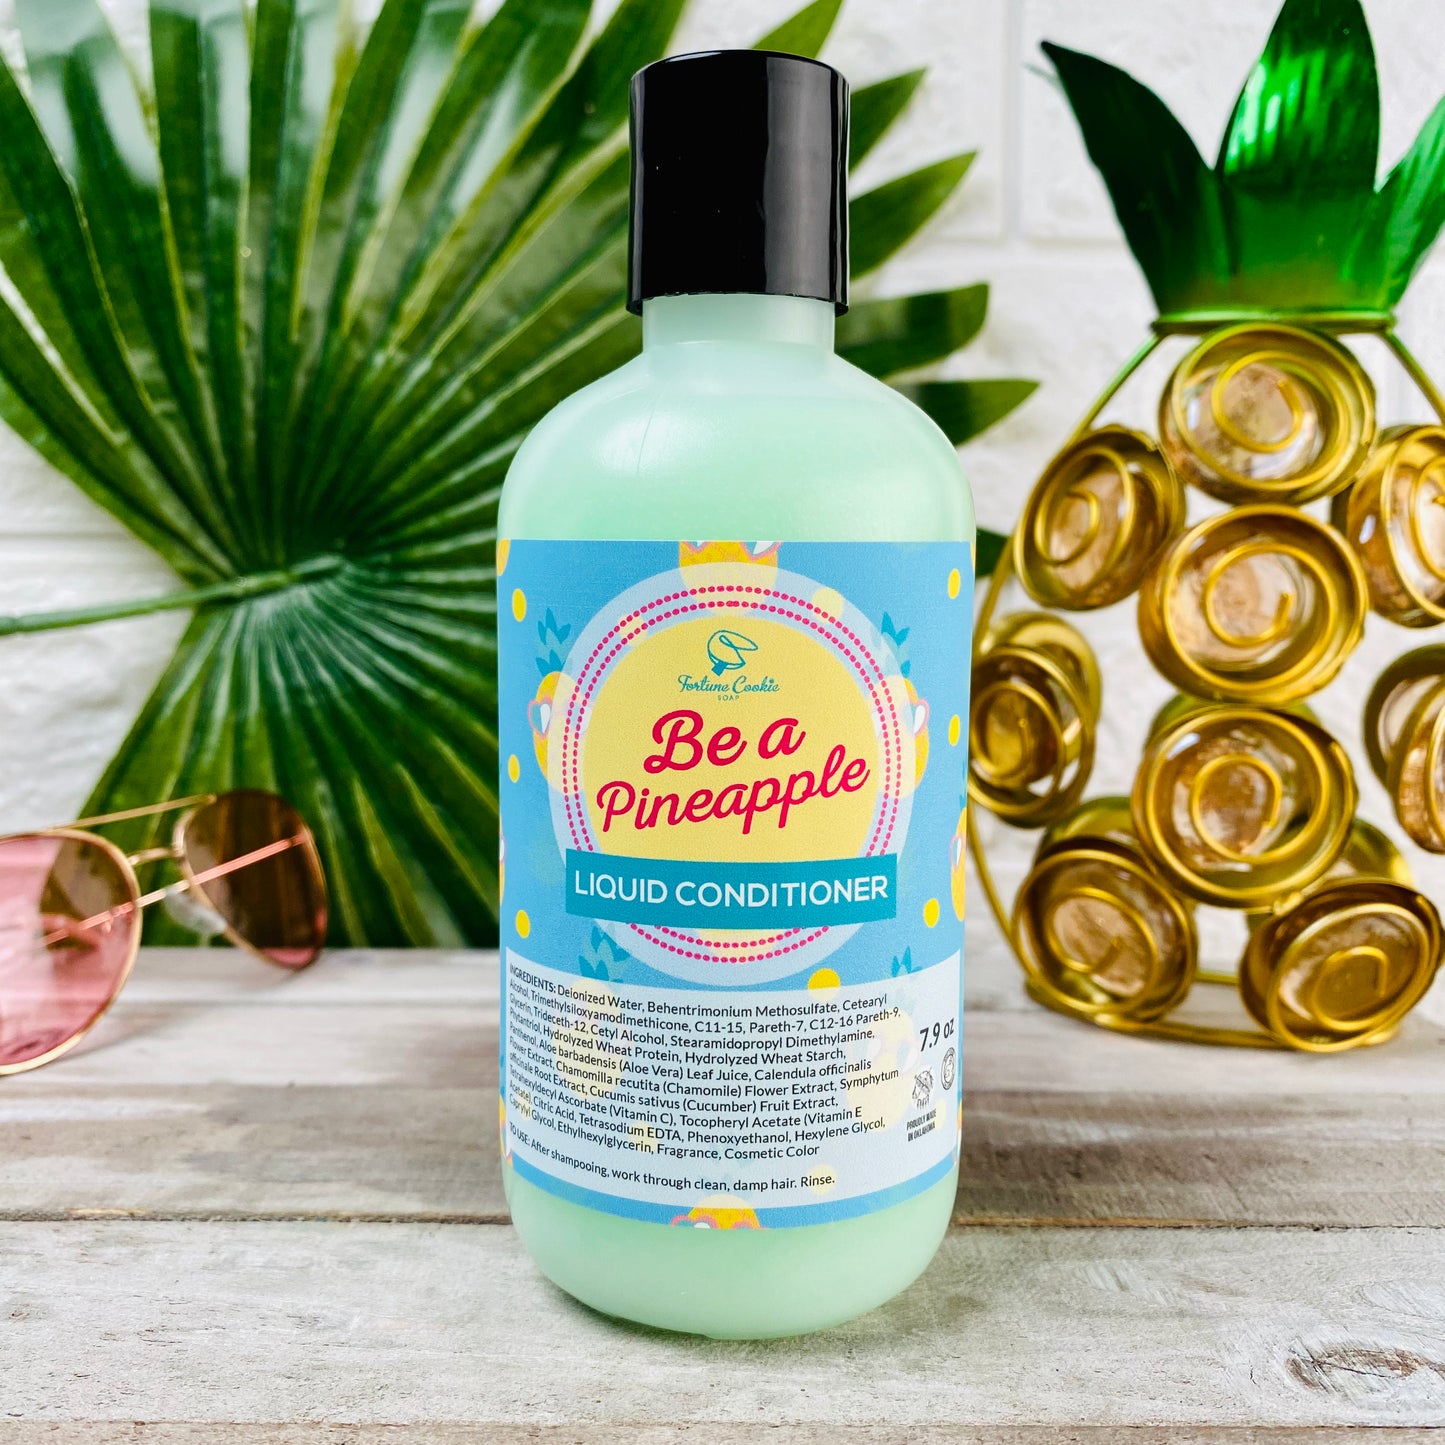 BE A PINEAPPLE Liquid Conditioner